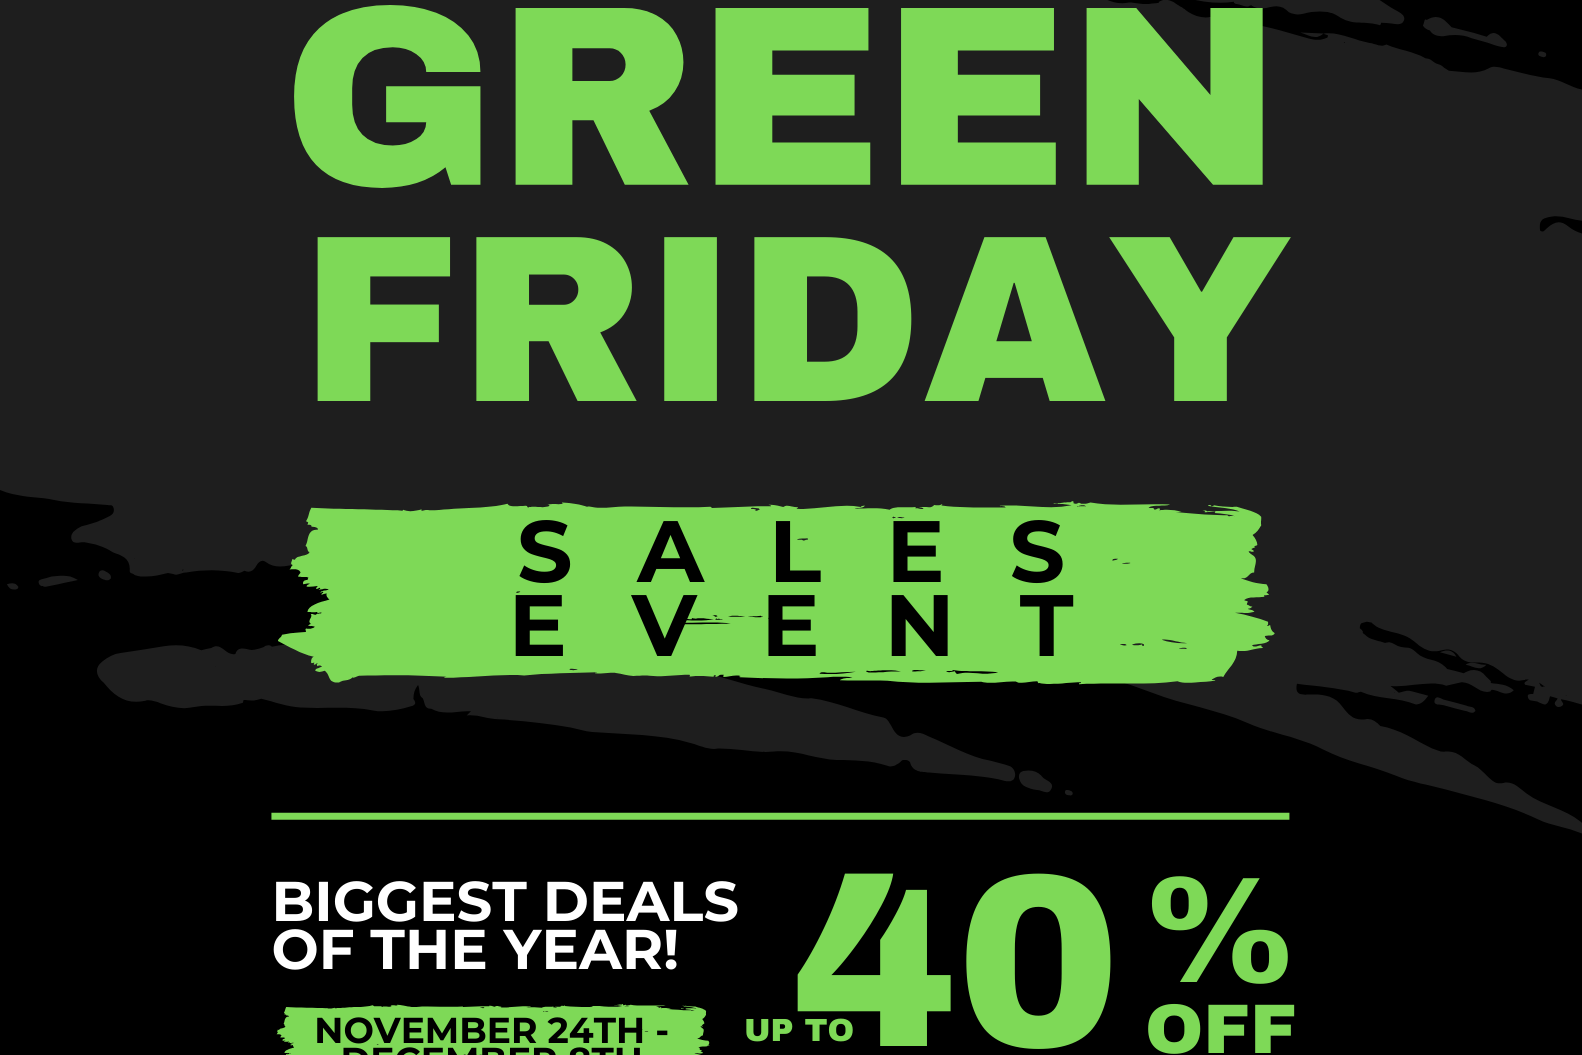 Green Friday Sales Event!